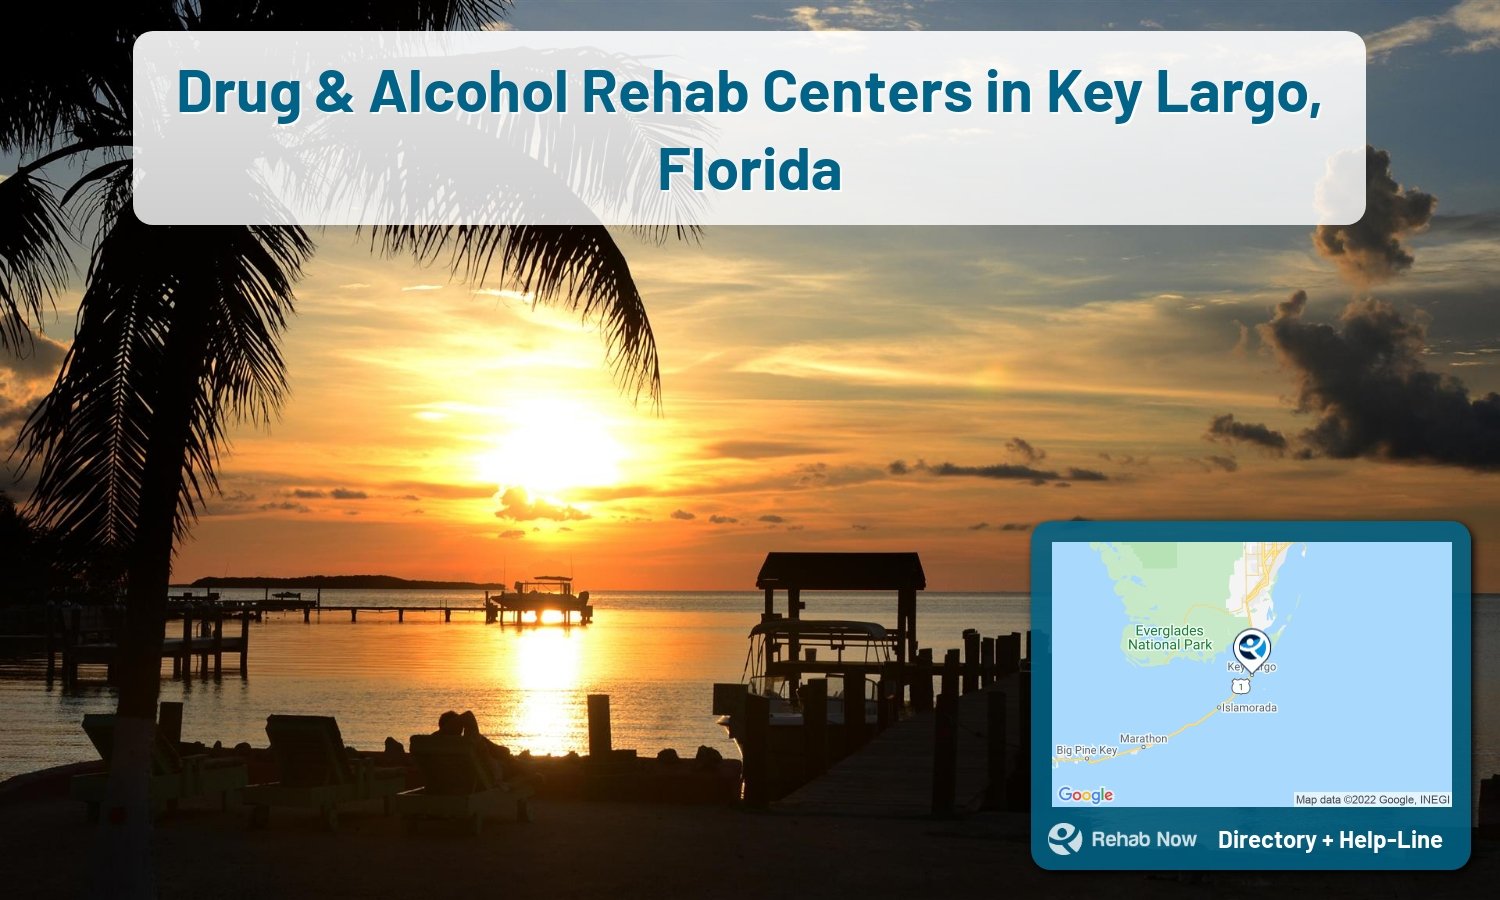 Find drug rehab and alcohol treatment services in Key Largo. Our experts help you find a center in Key Largo, Florida